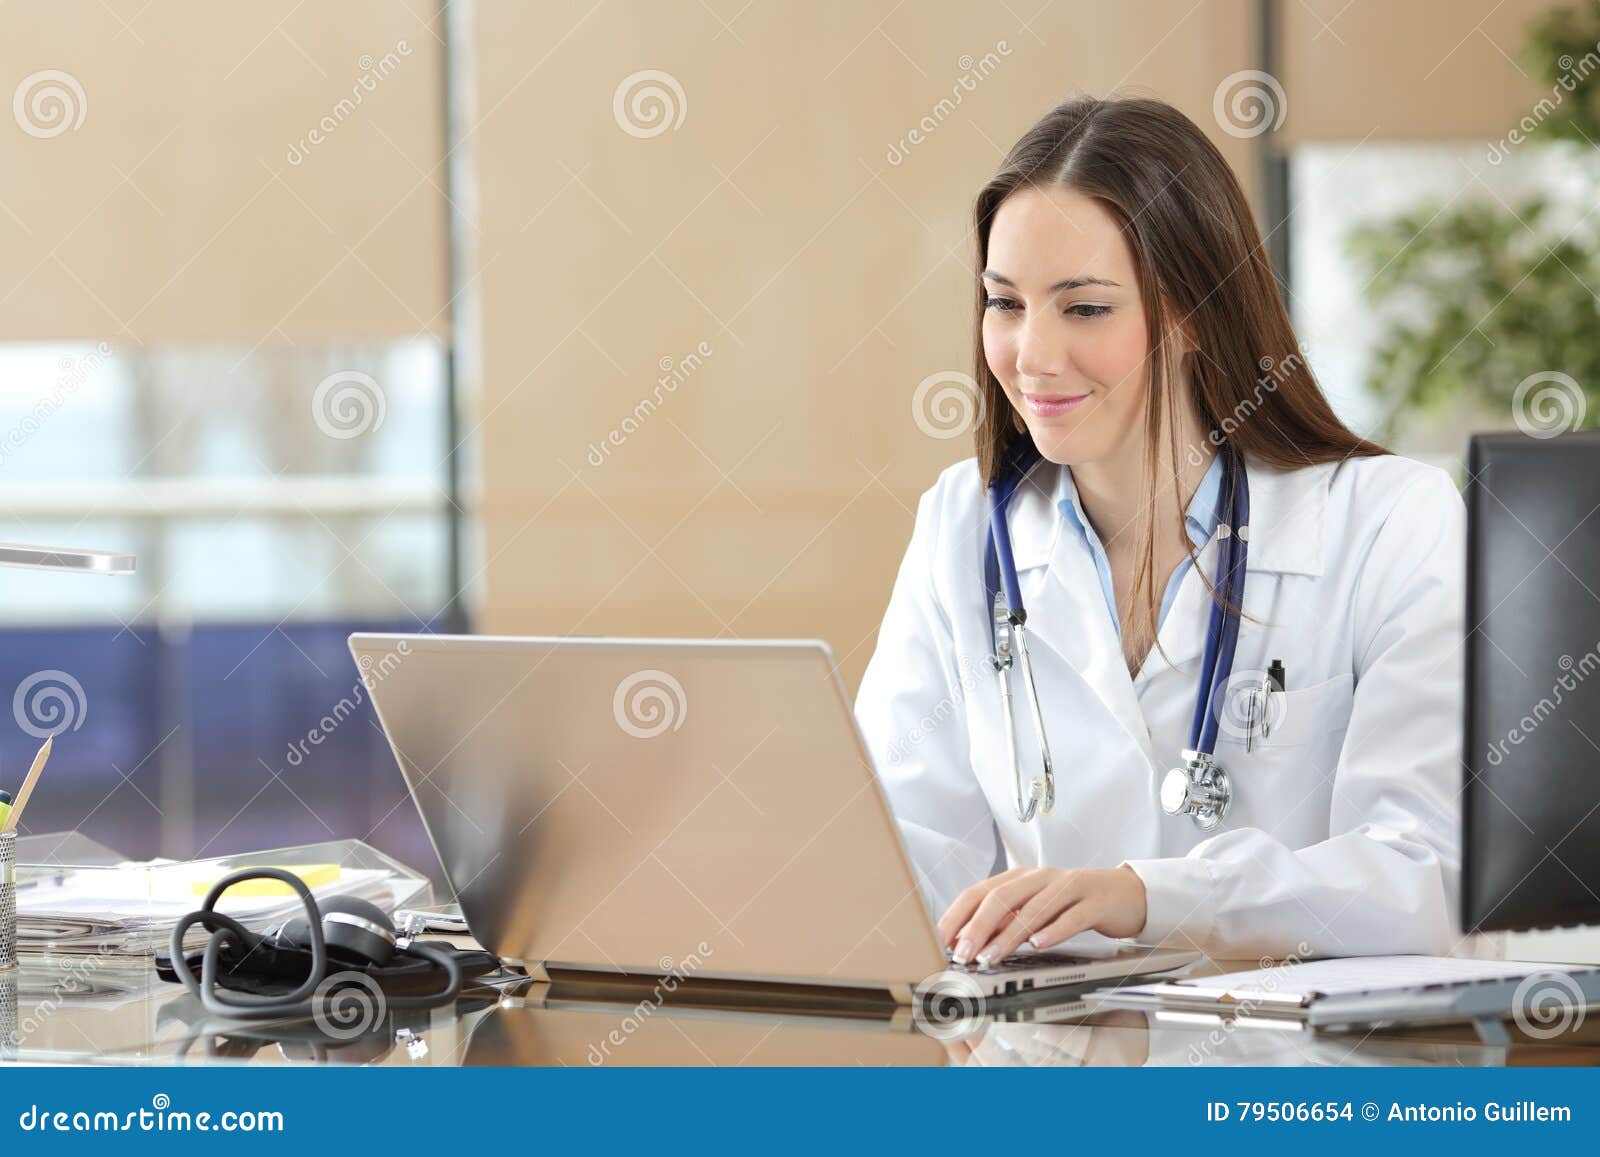 doctor working on line in a consultation